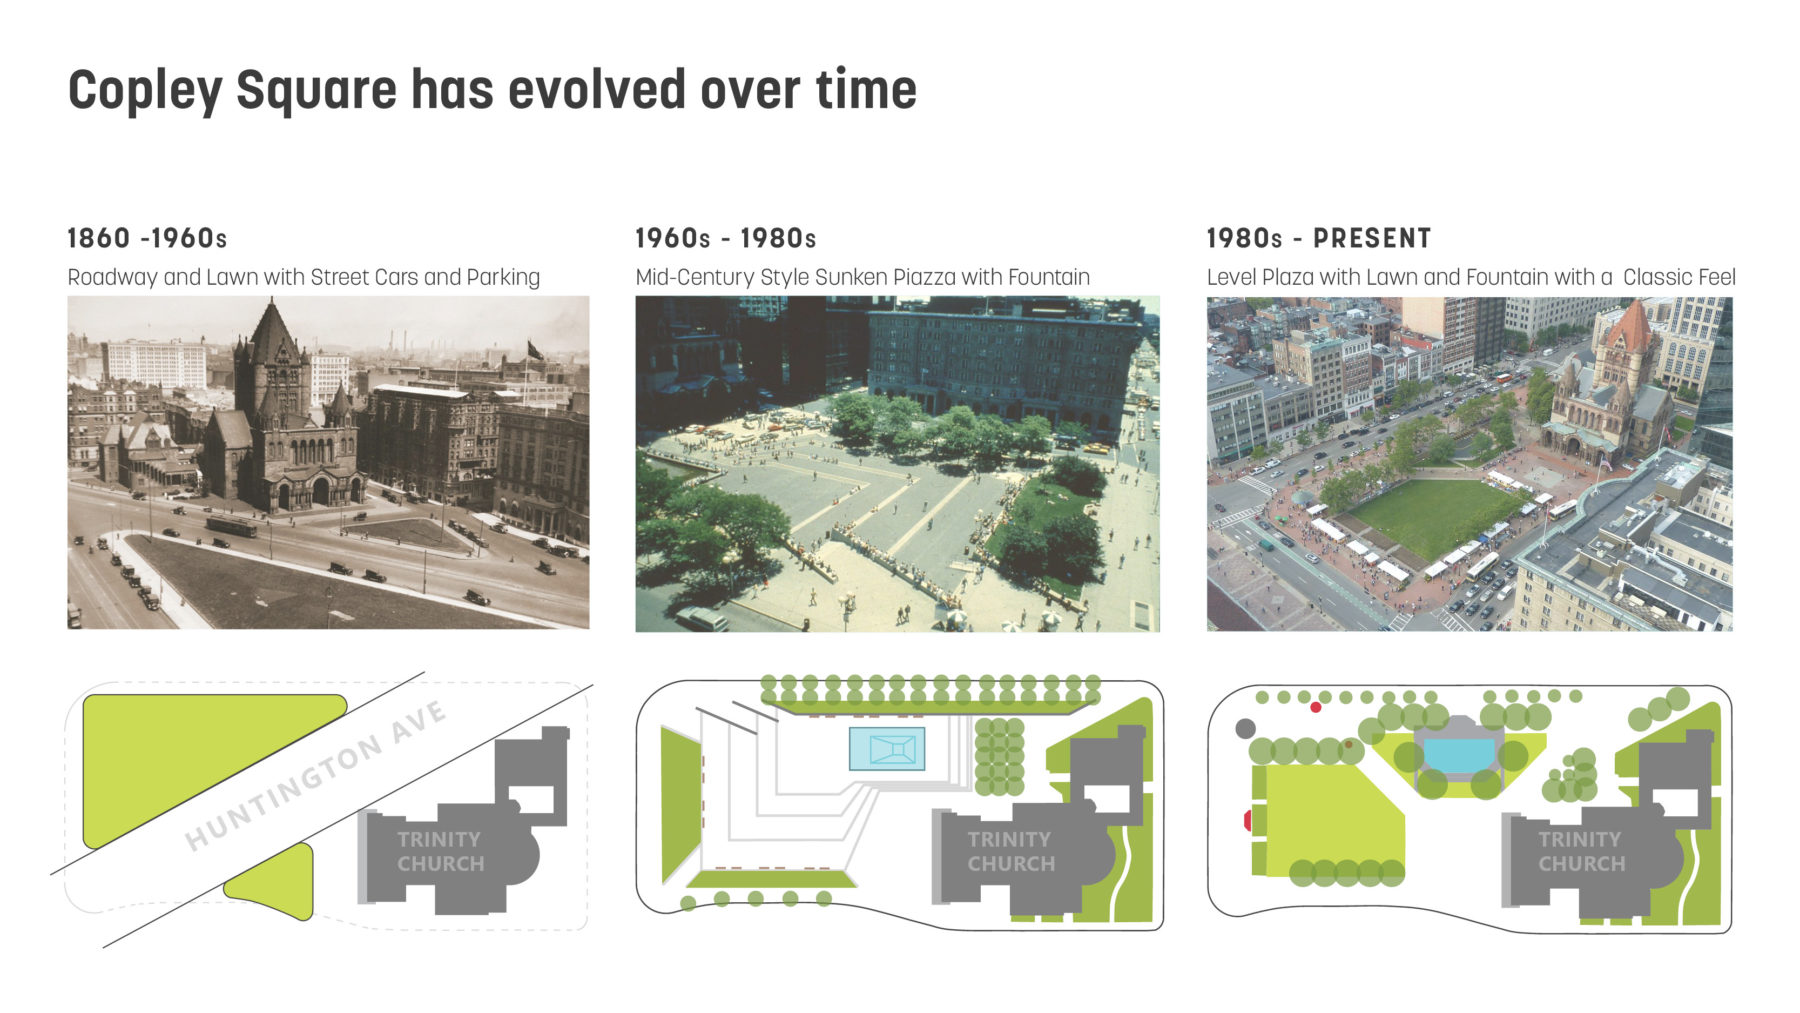 Graphic showing what Copley looked like from the 1860s-1960s, during the 1960s-1980s, and today